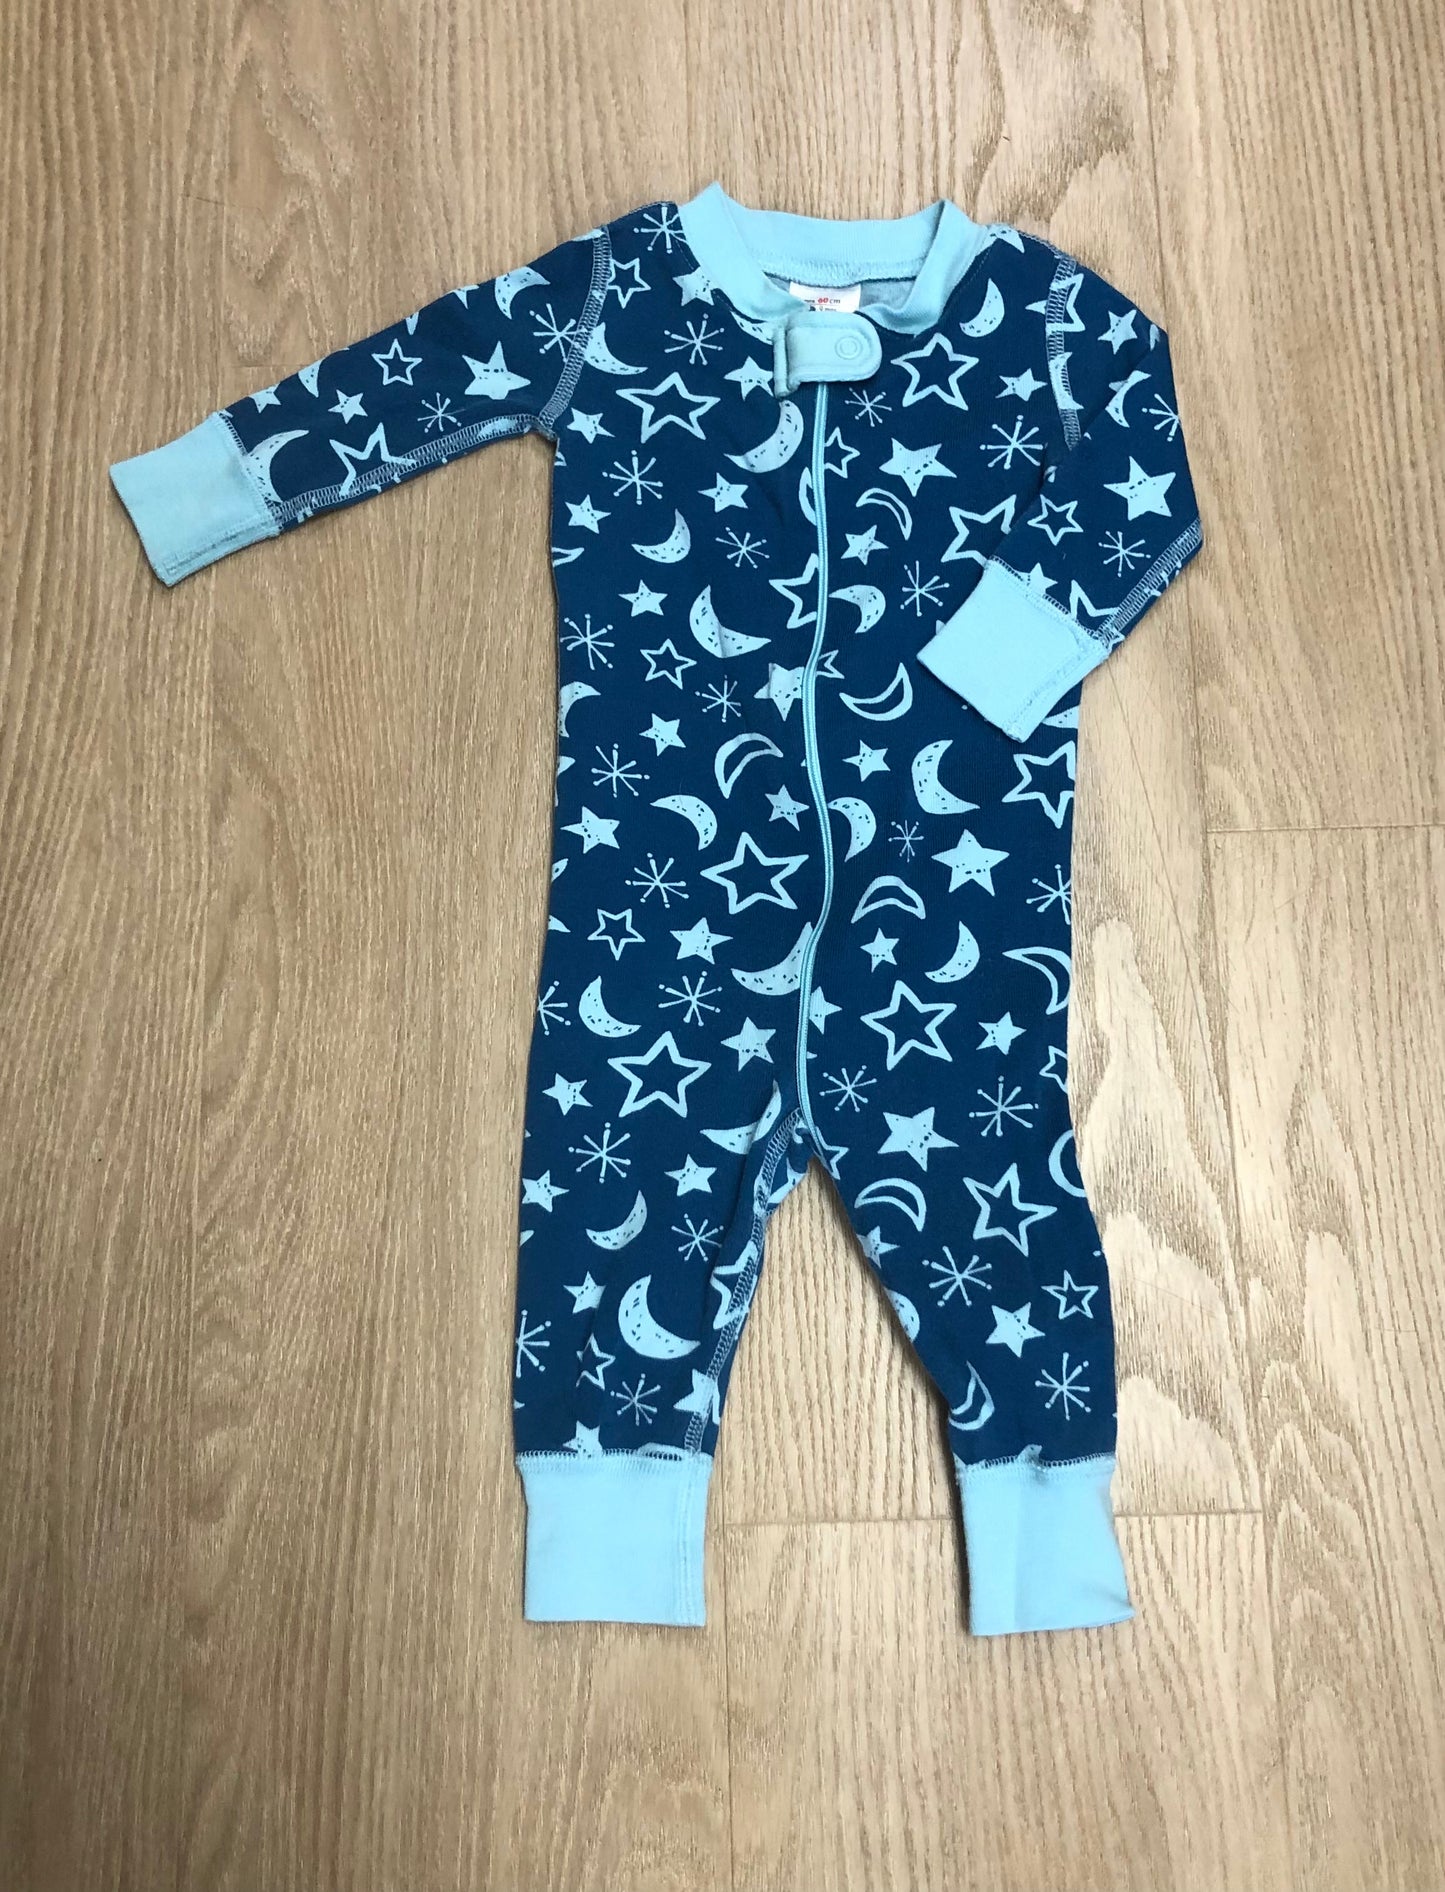 Hanna Andersson Child Size 6 Months Blue Stars Pajamas